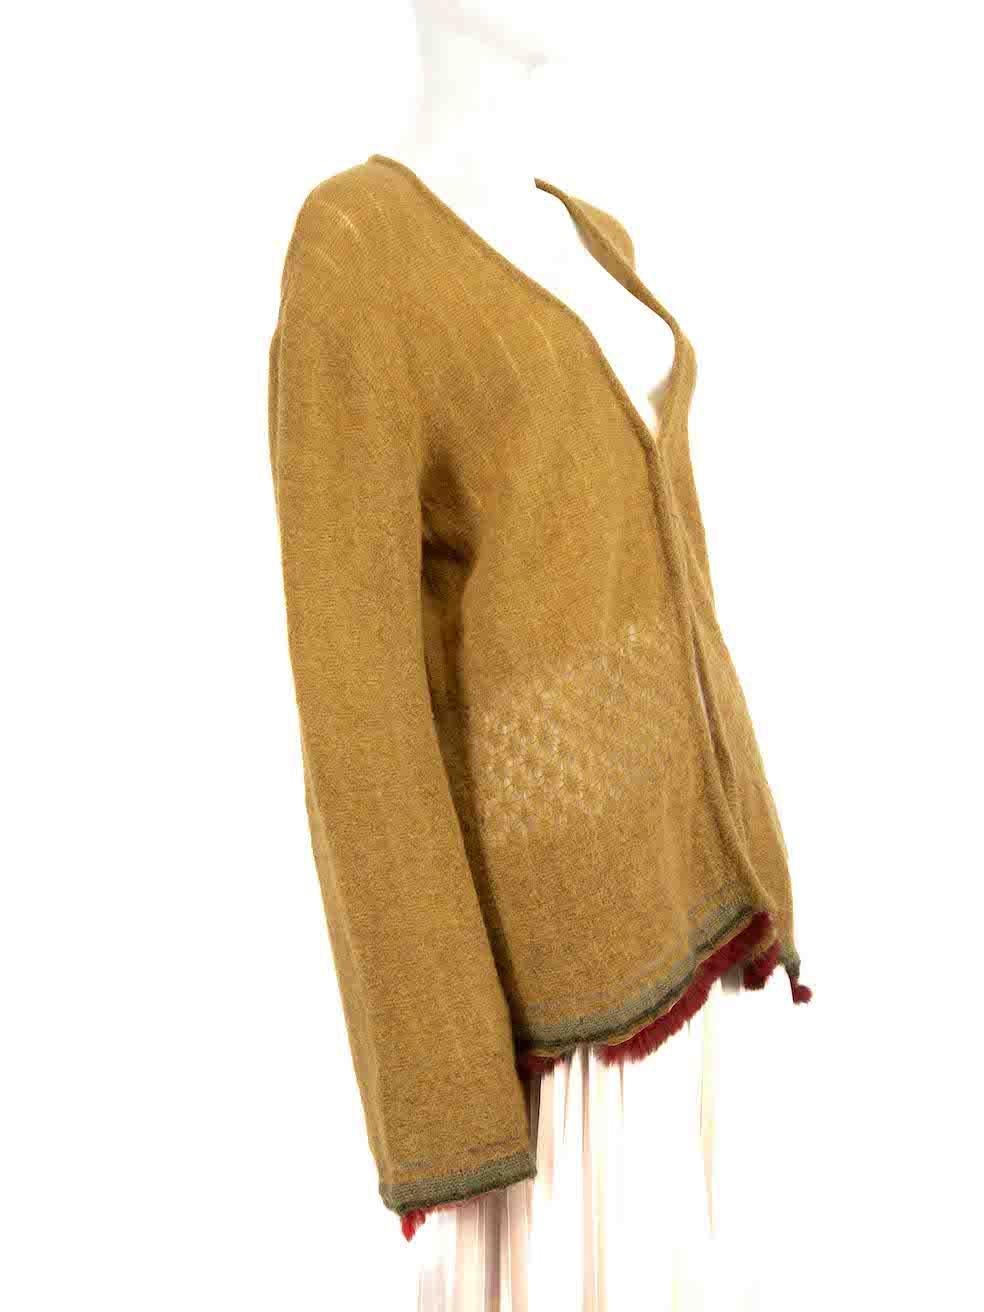 CONDITION is Very good. Hardly any visible wear to cardigan is evident on this used Roberto Cavalli designer resale item.
 
 Details
 Green
 Wool
 Knit cardigan
 Red fur trim
 V-neck
 Hook fastening
 Long sleeves
 
 
 Made in Italy
 
 Composition
